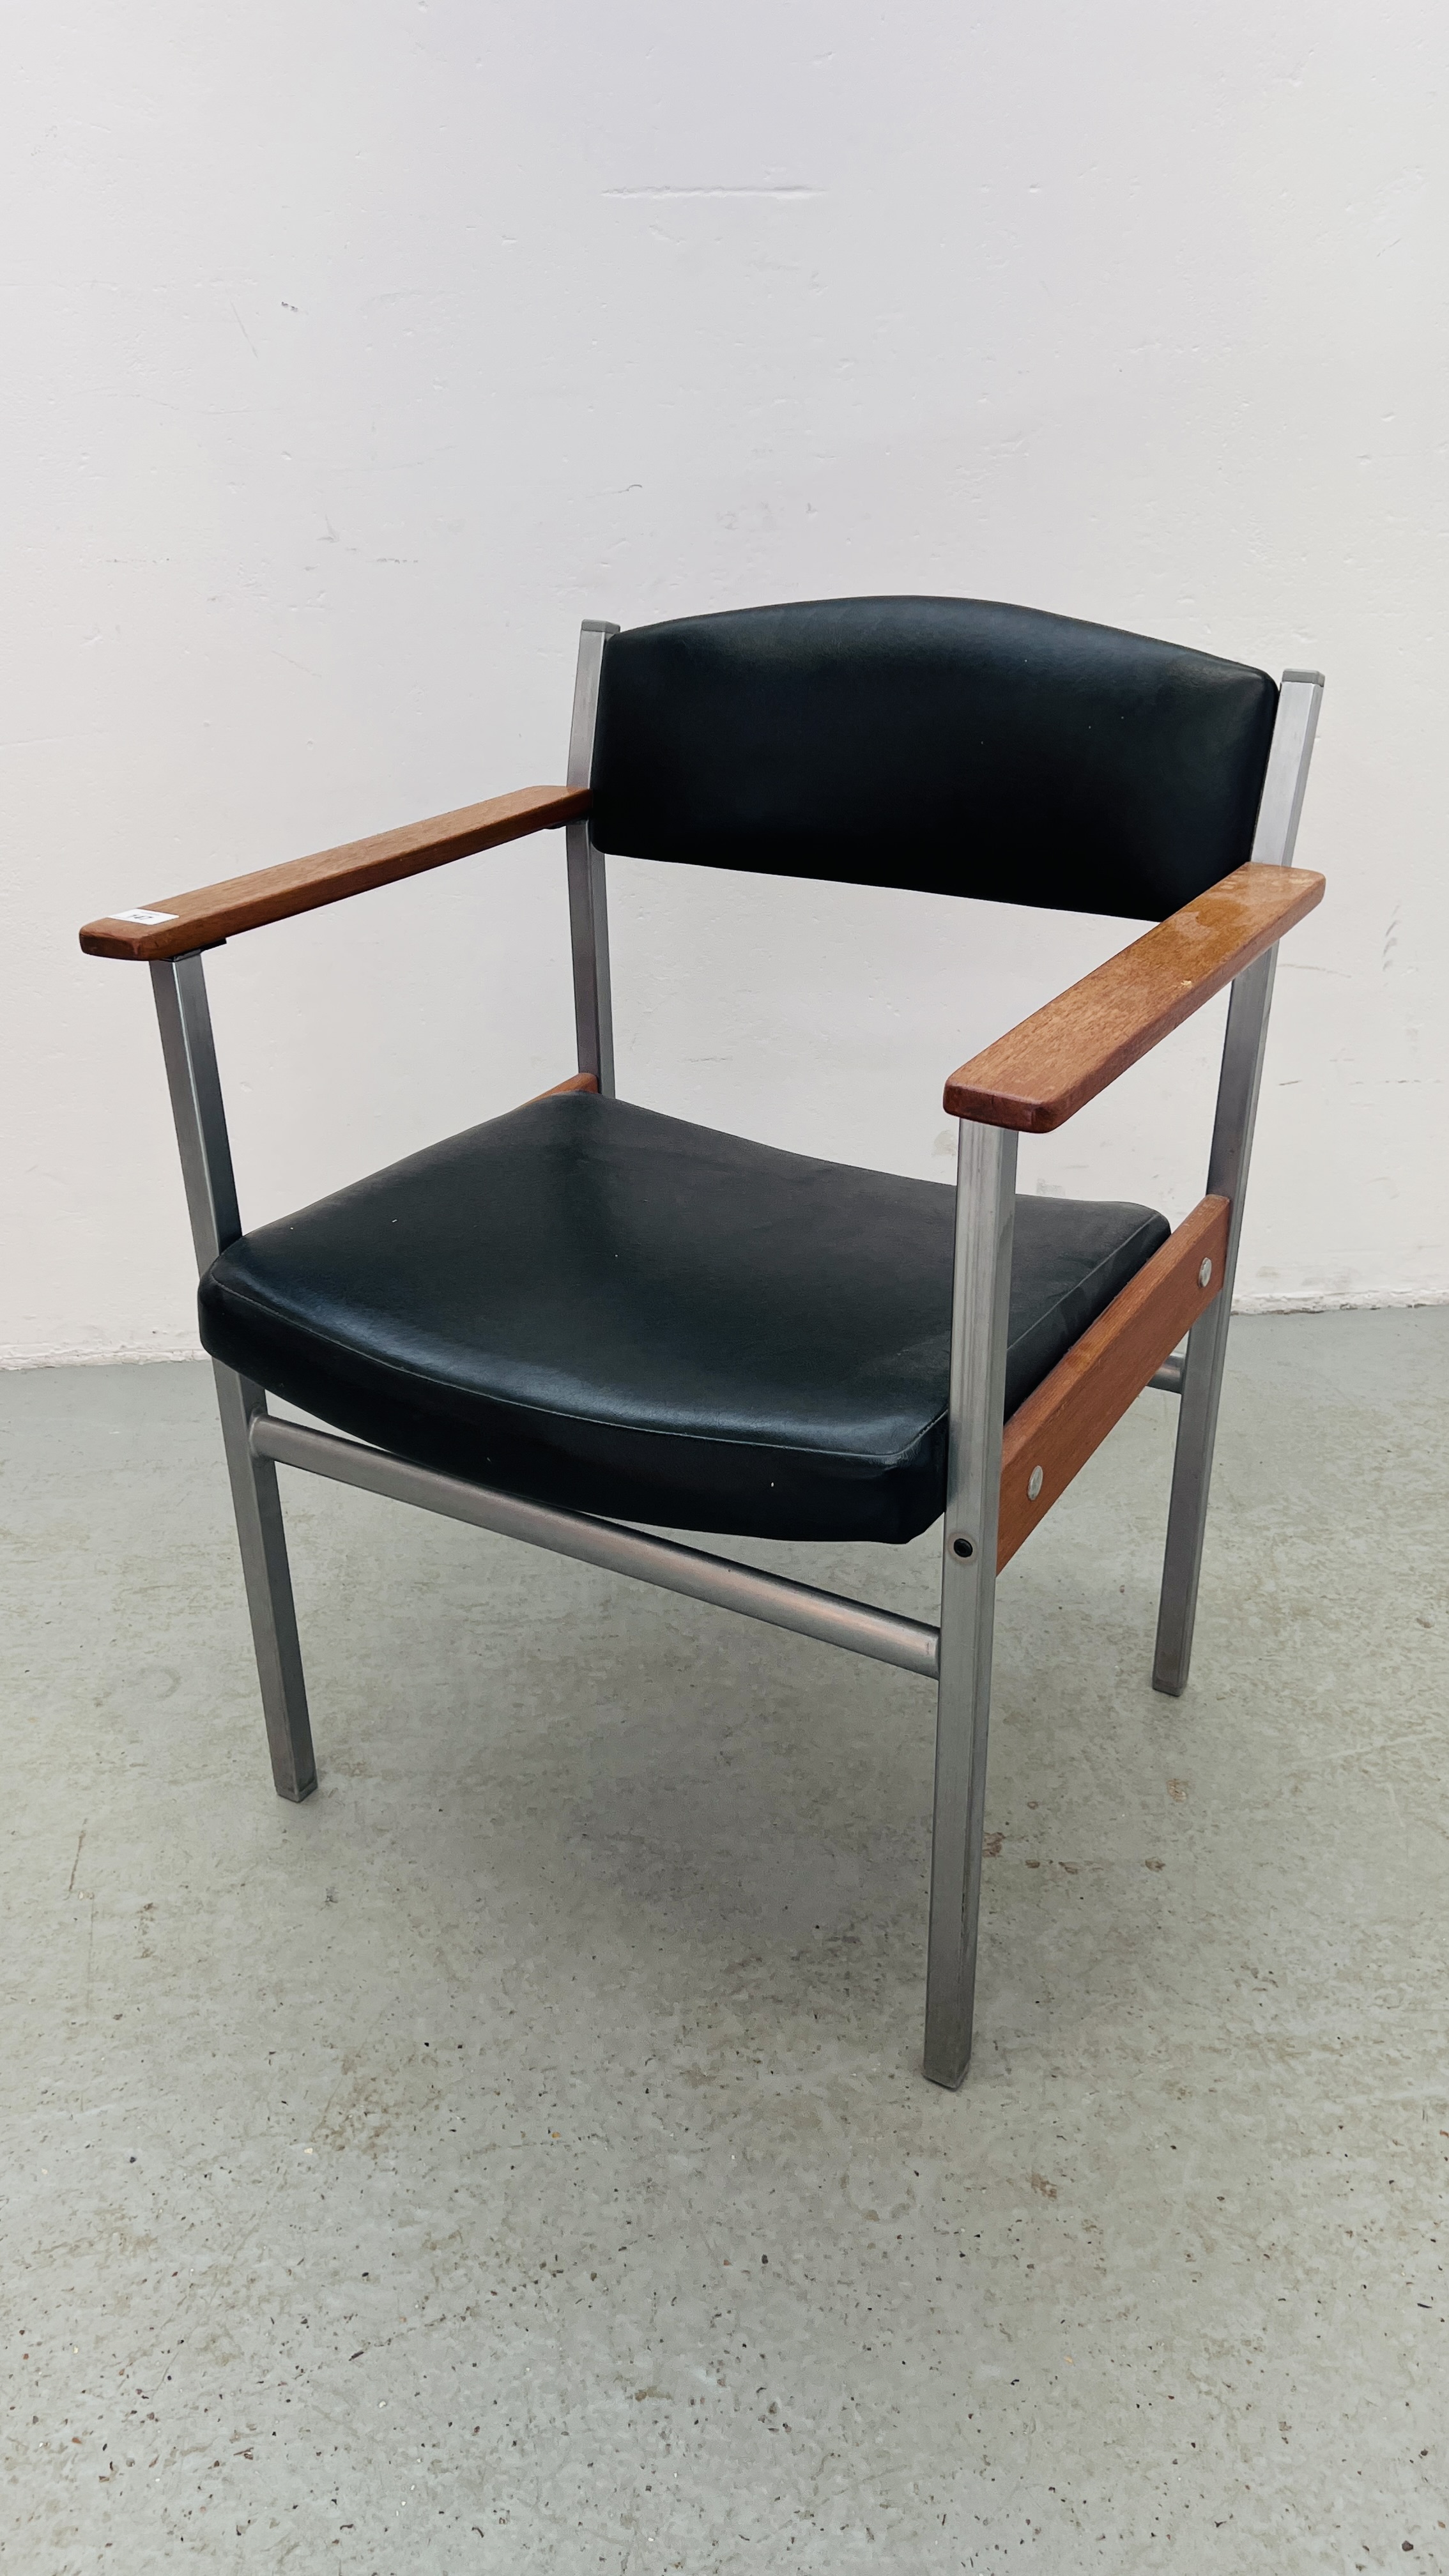 A MID CENTURY METAL FRAMED ELBOW CHAIR.